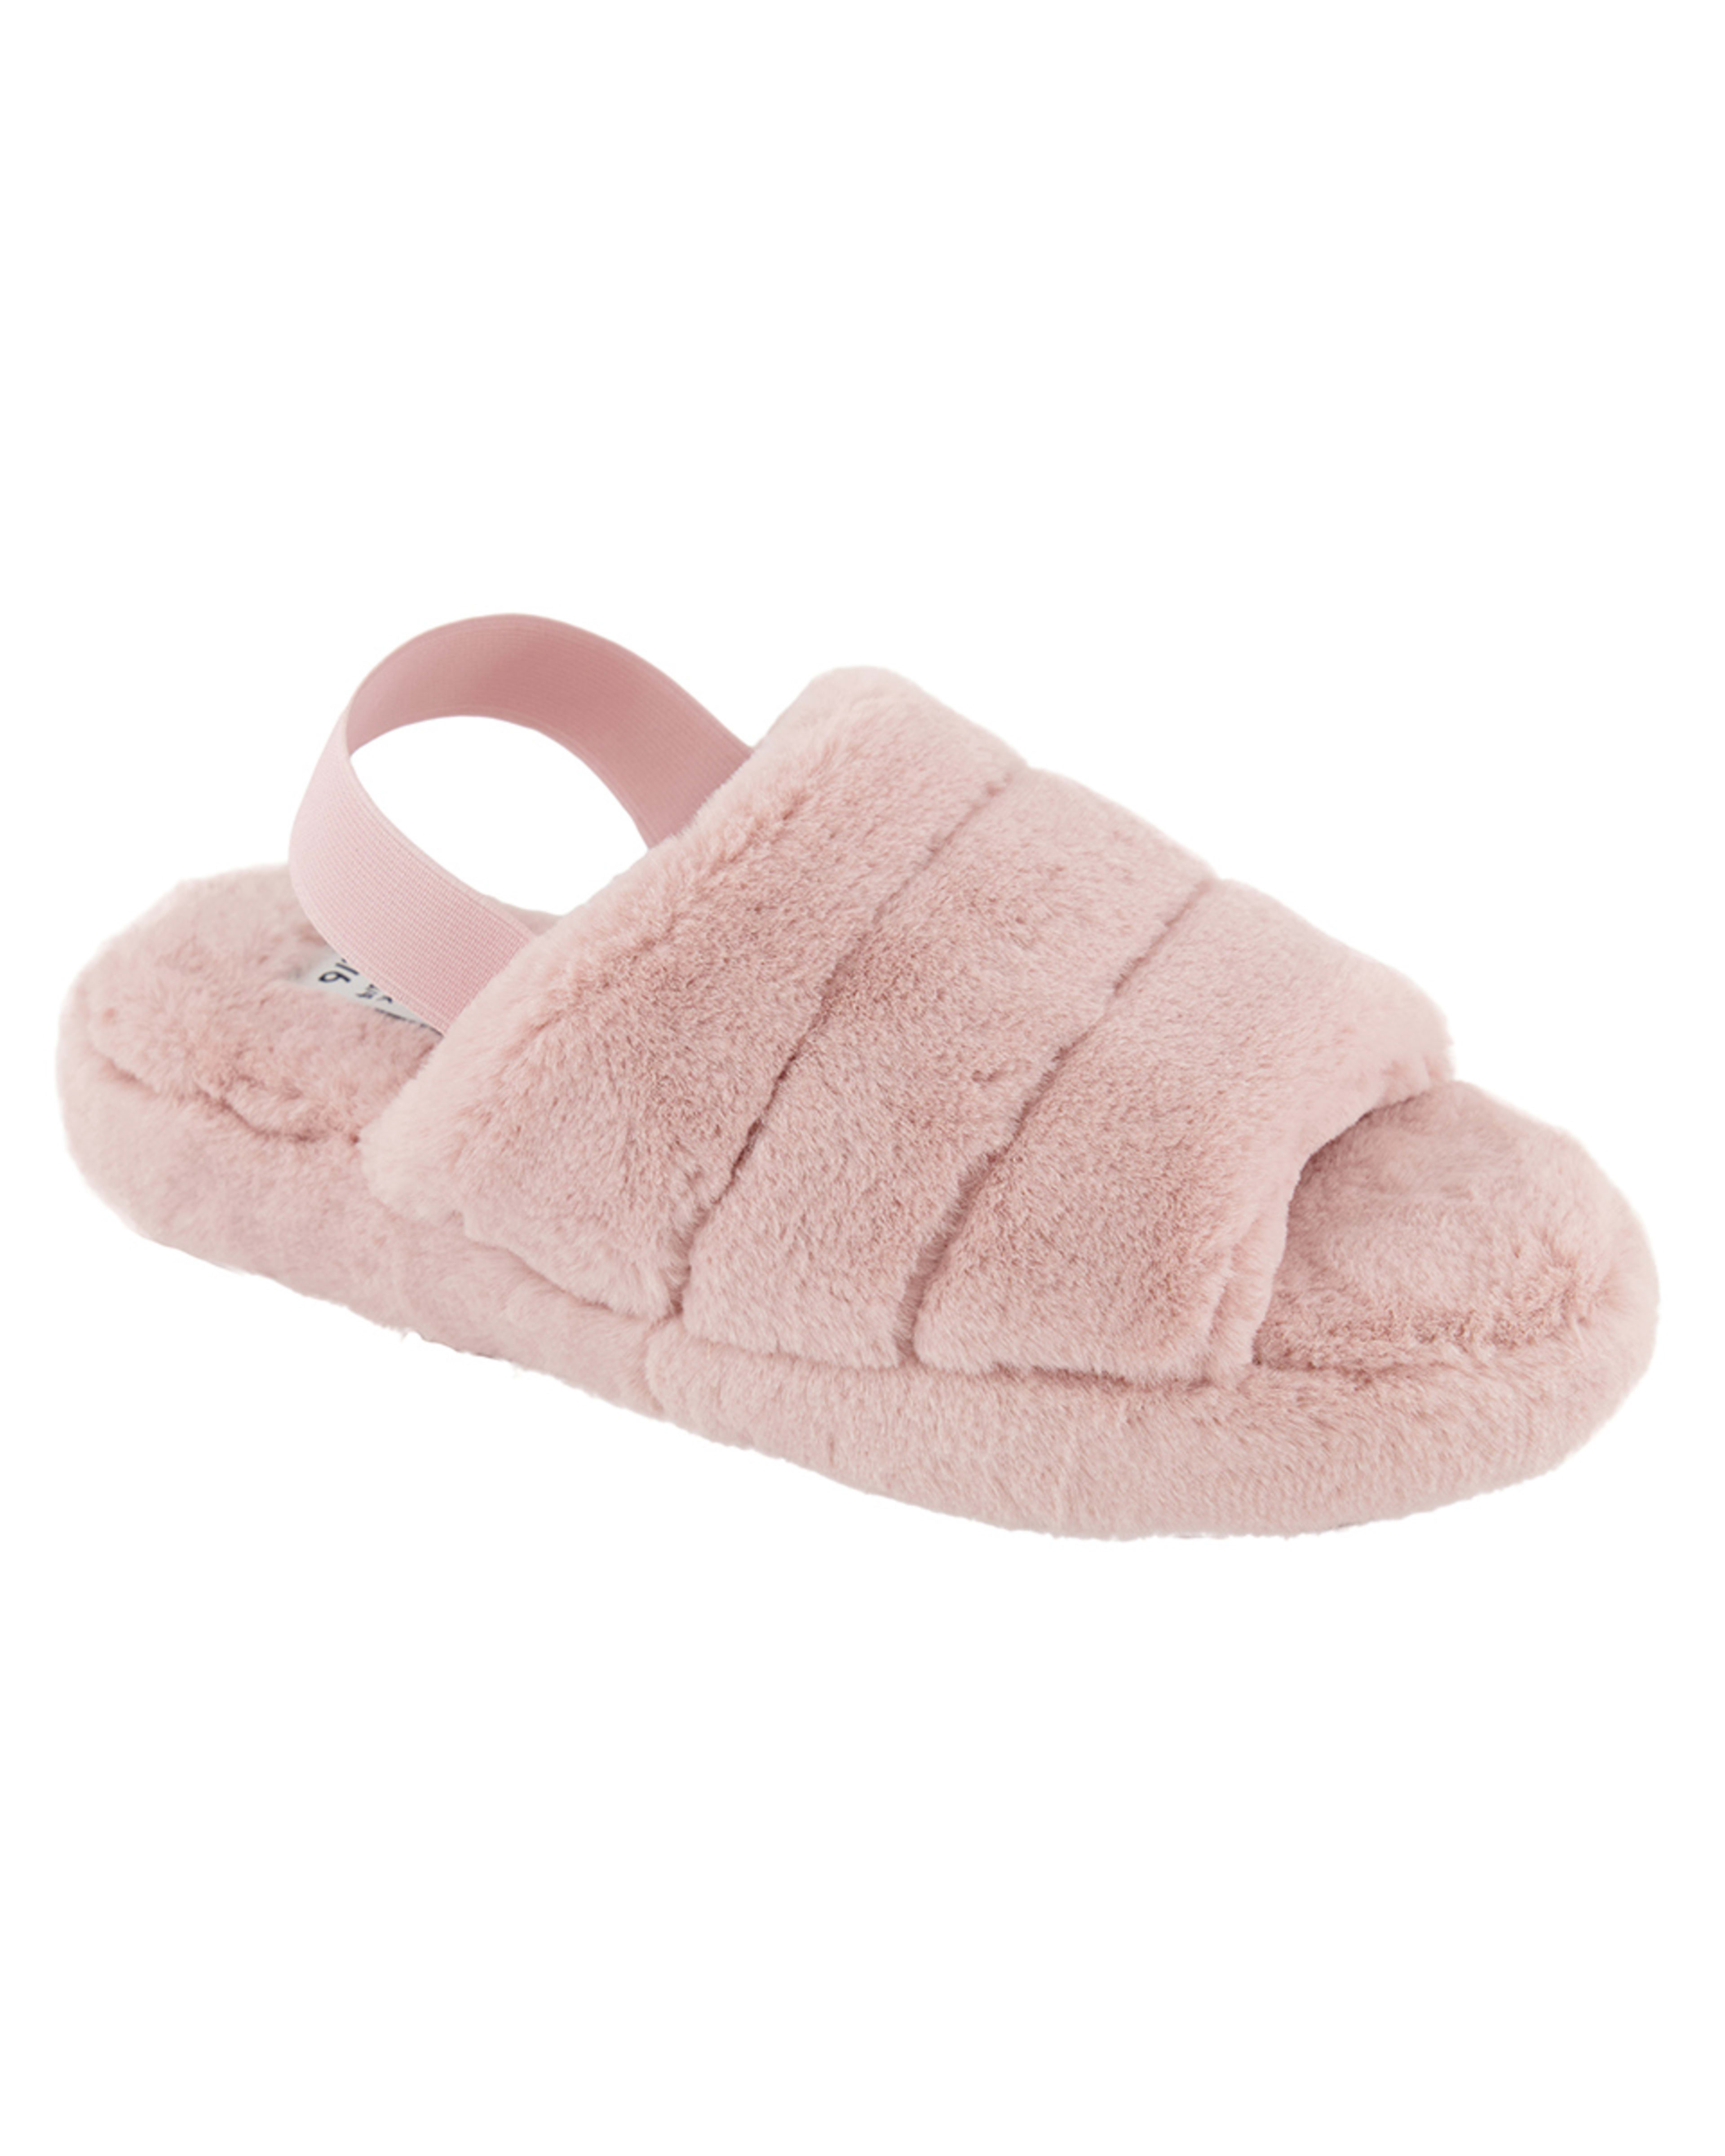 Furry Footbed Slippers - Kmart